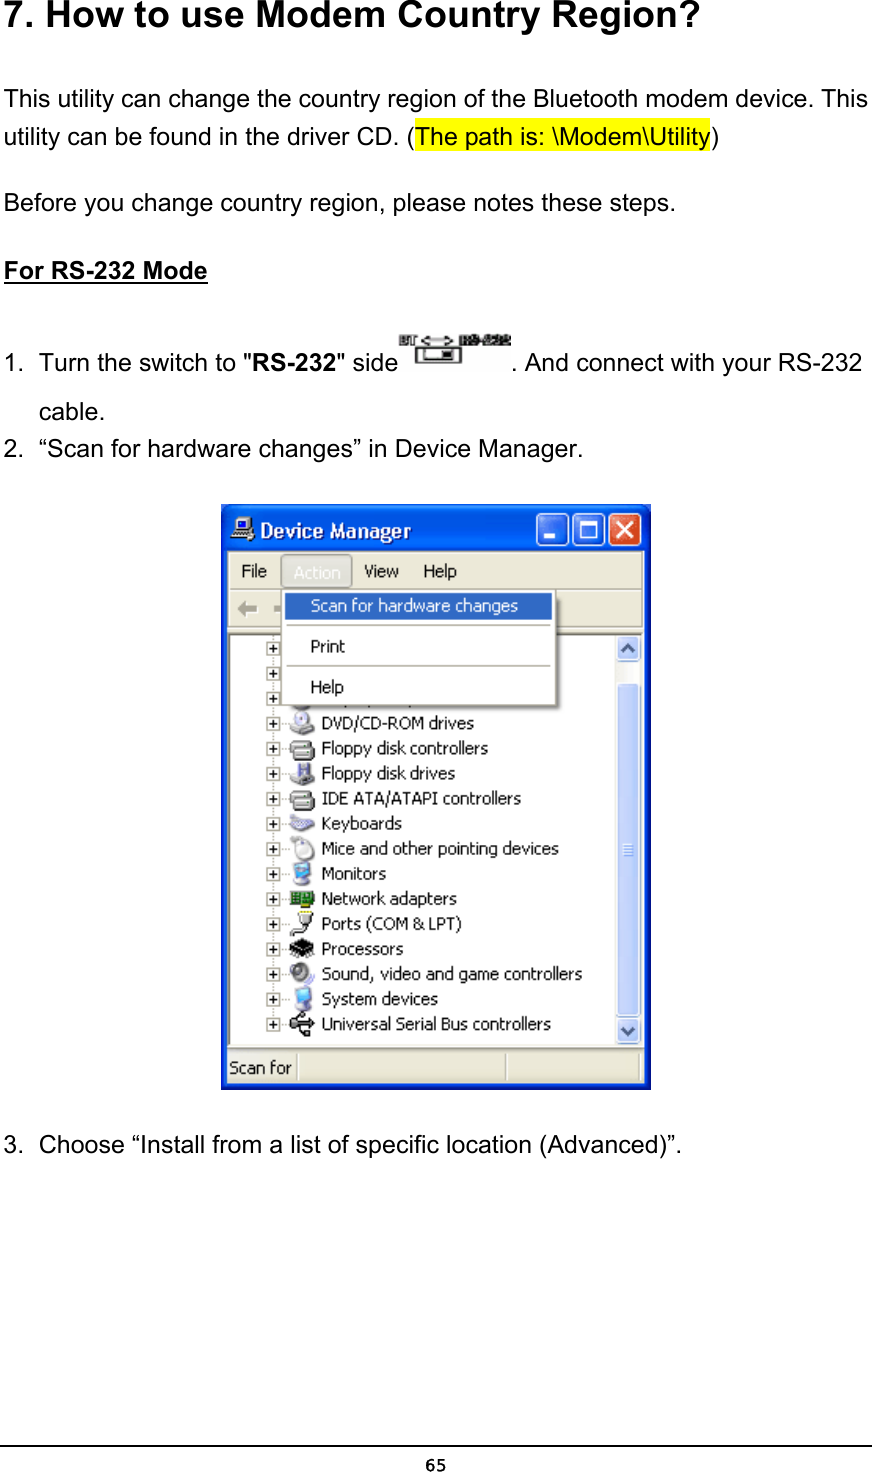   657. How to use Modem Country Region? This utility can change the country region of the Bluetooth modem device. This utility can be found in the driver CD. (The path is: \Modem\Utility) Before you change country region, please notes these steps. For RS-232 Mode 1.  Turn the switch to &quot;RS-232&quot; side . And connect with your RS-232 cable. 2.  “Scan for hardware changes” in Device Manager.  3.  Choose “Install from a list of specific location (Advanced)”. 